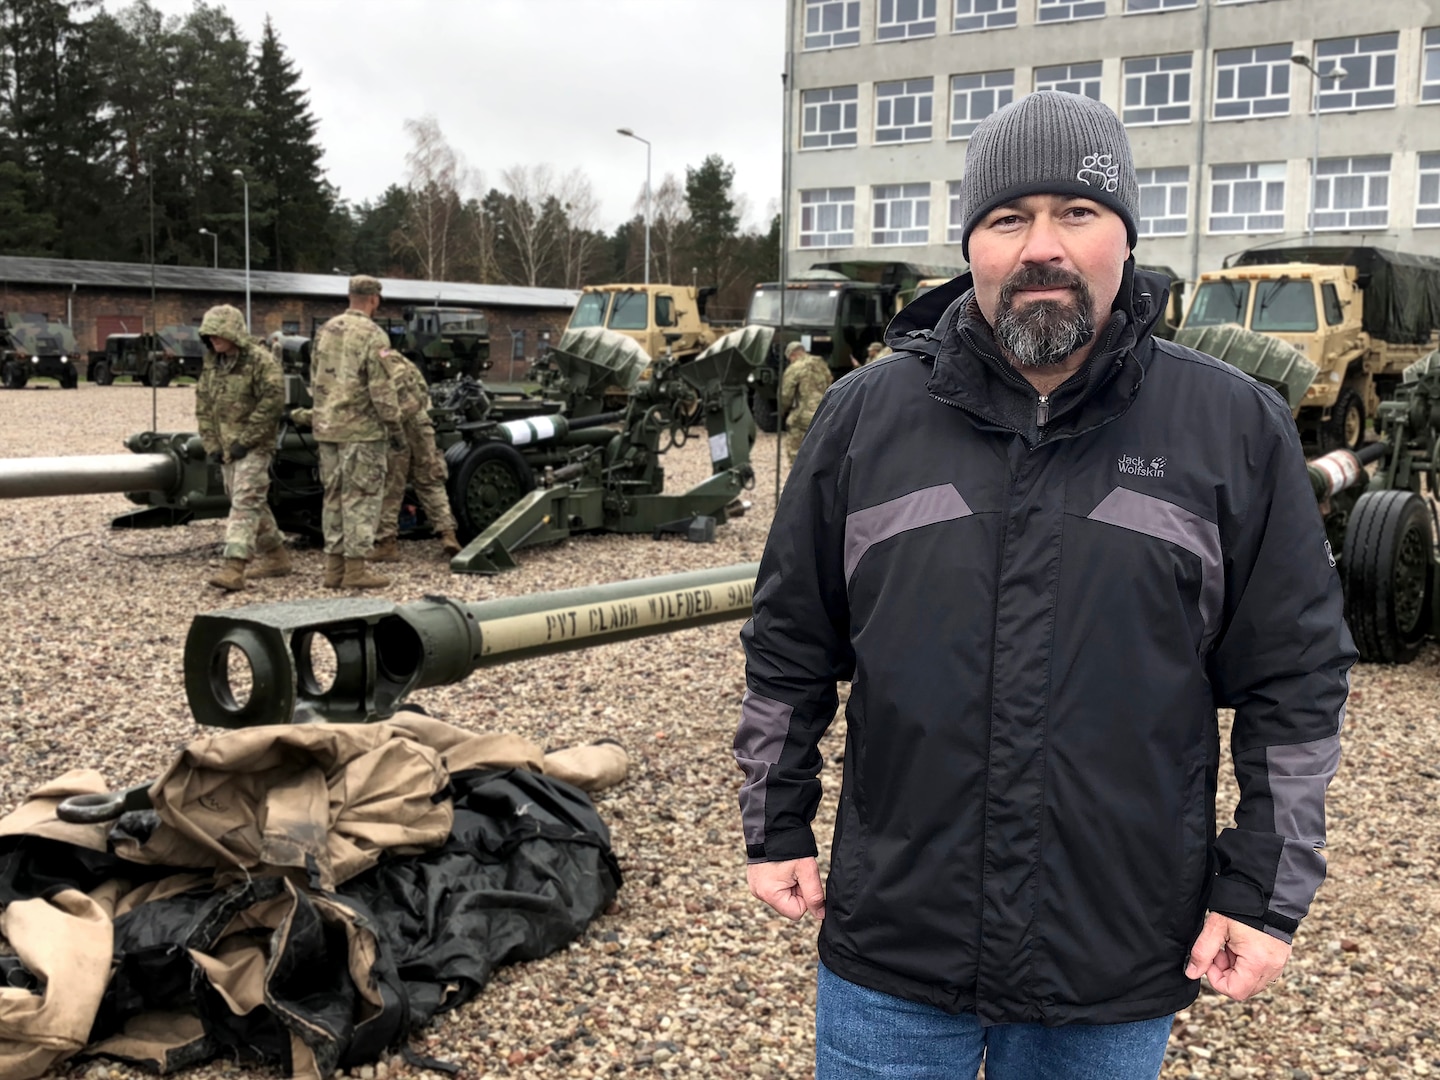 Photographic illustration of Customer Support Representative in front of military personnel preparing large scale equipment in a gravel parking lot.